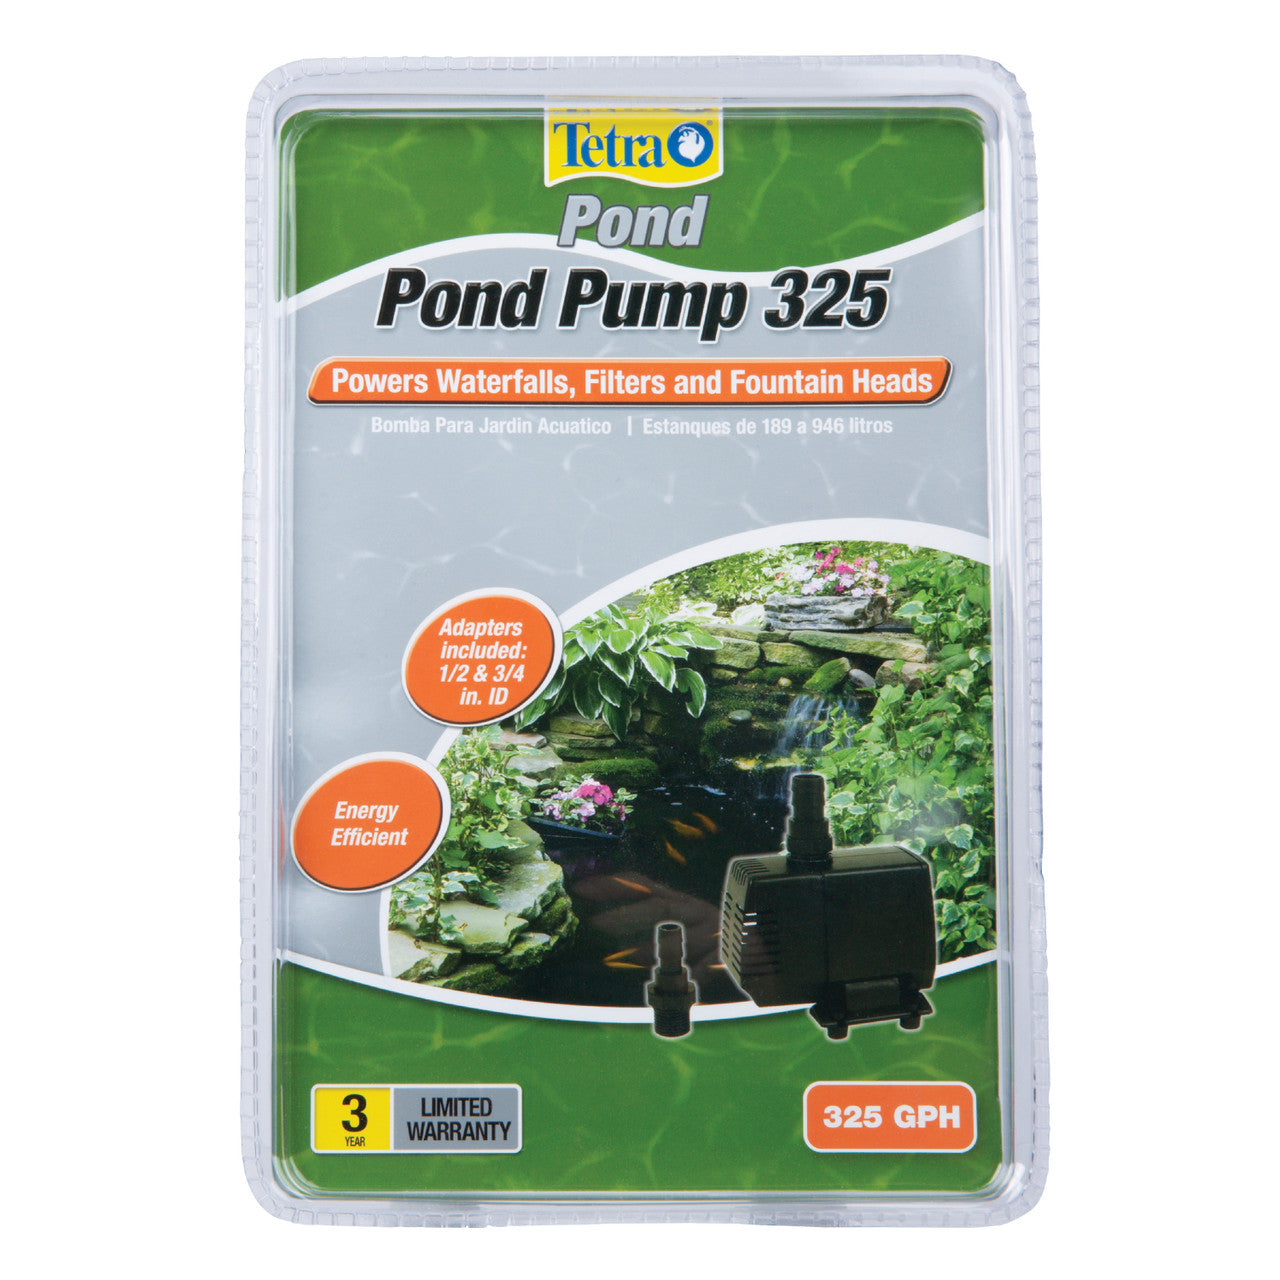 Tetra Water Garden Pump 325 for Waterfalls, Filters, and Fountain Heads Black 325 GPH